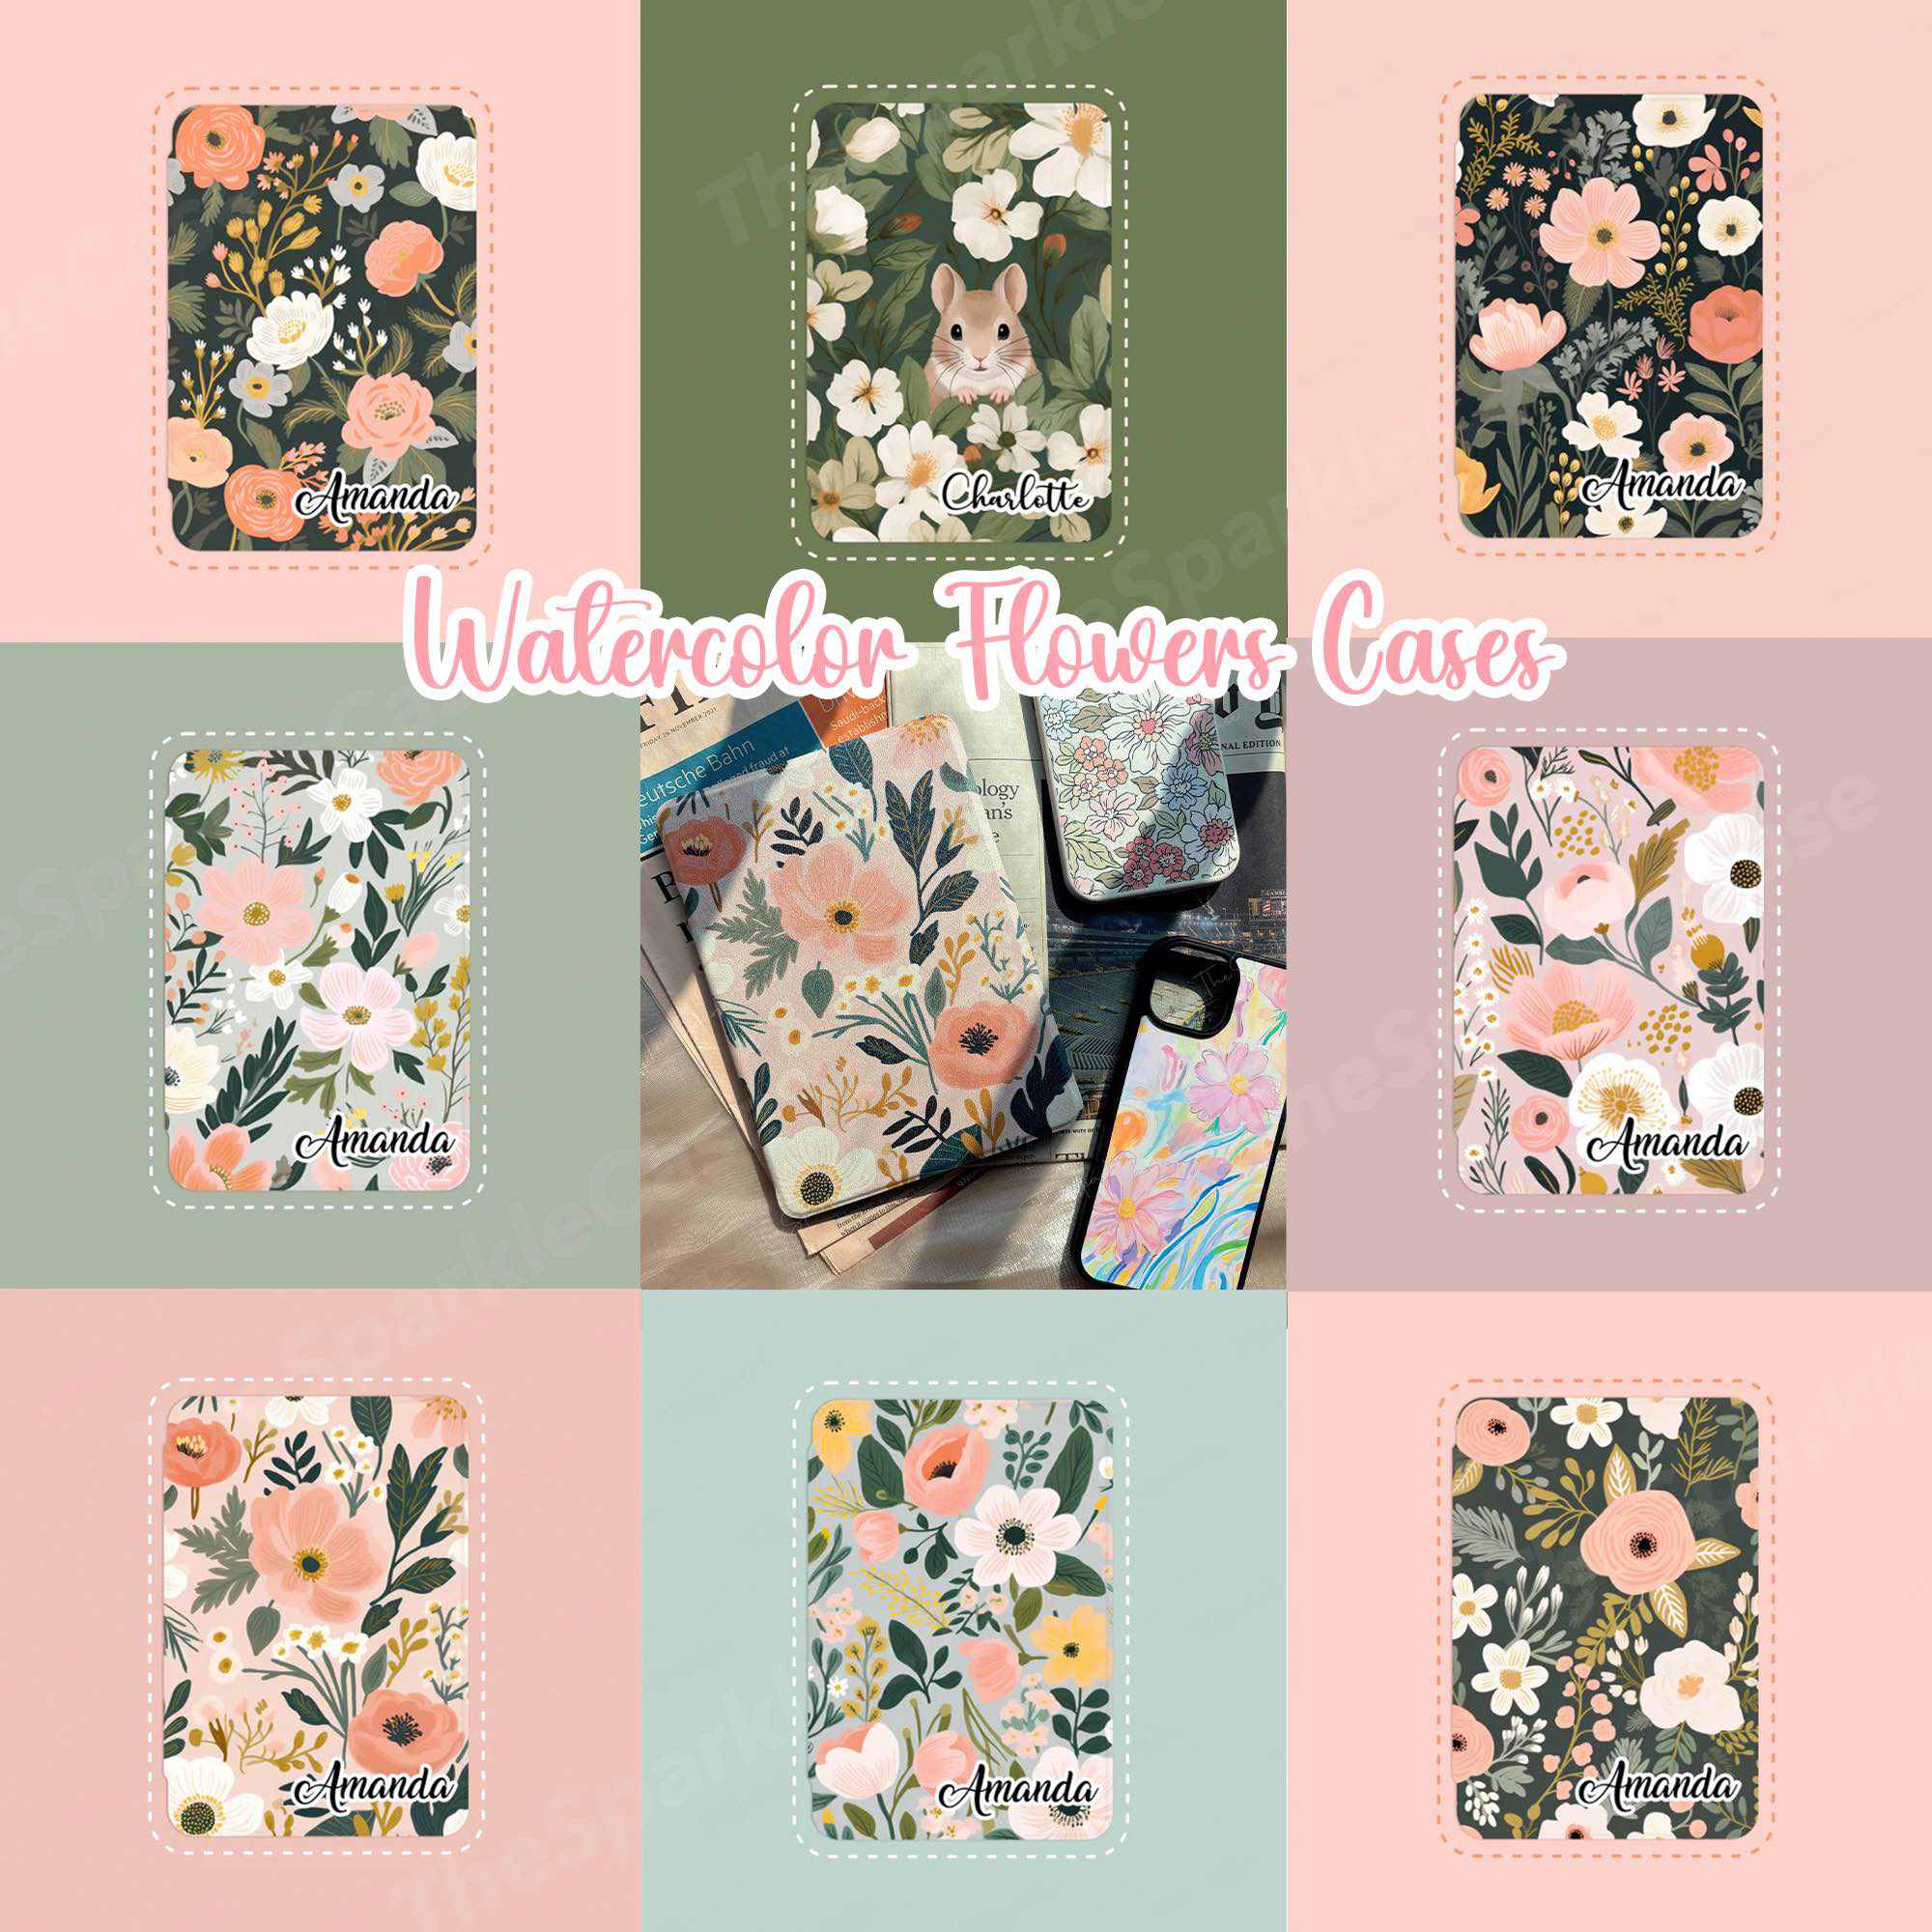 Aesthetic Floral iPad Case Cover Free Personalization